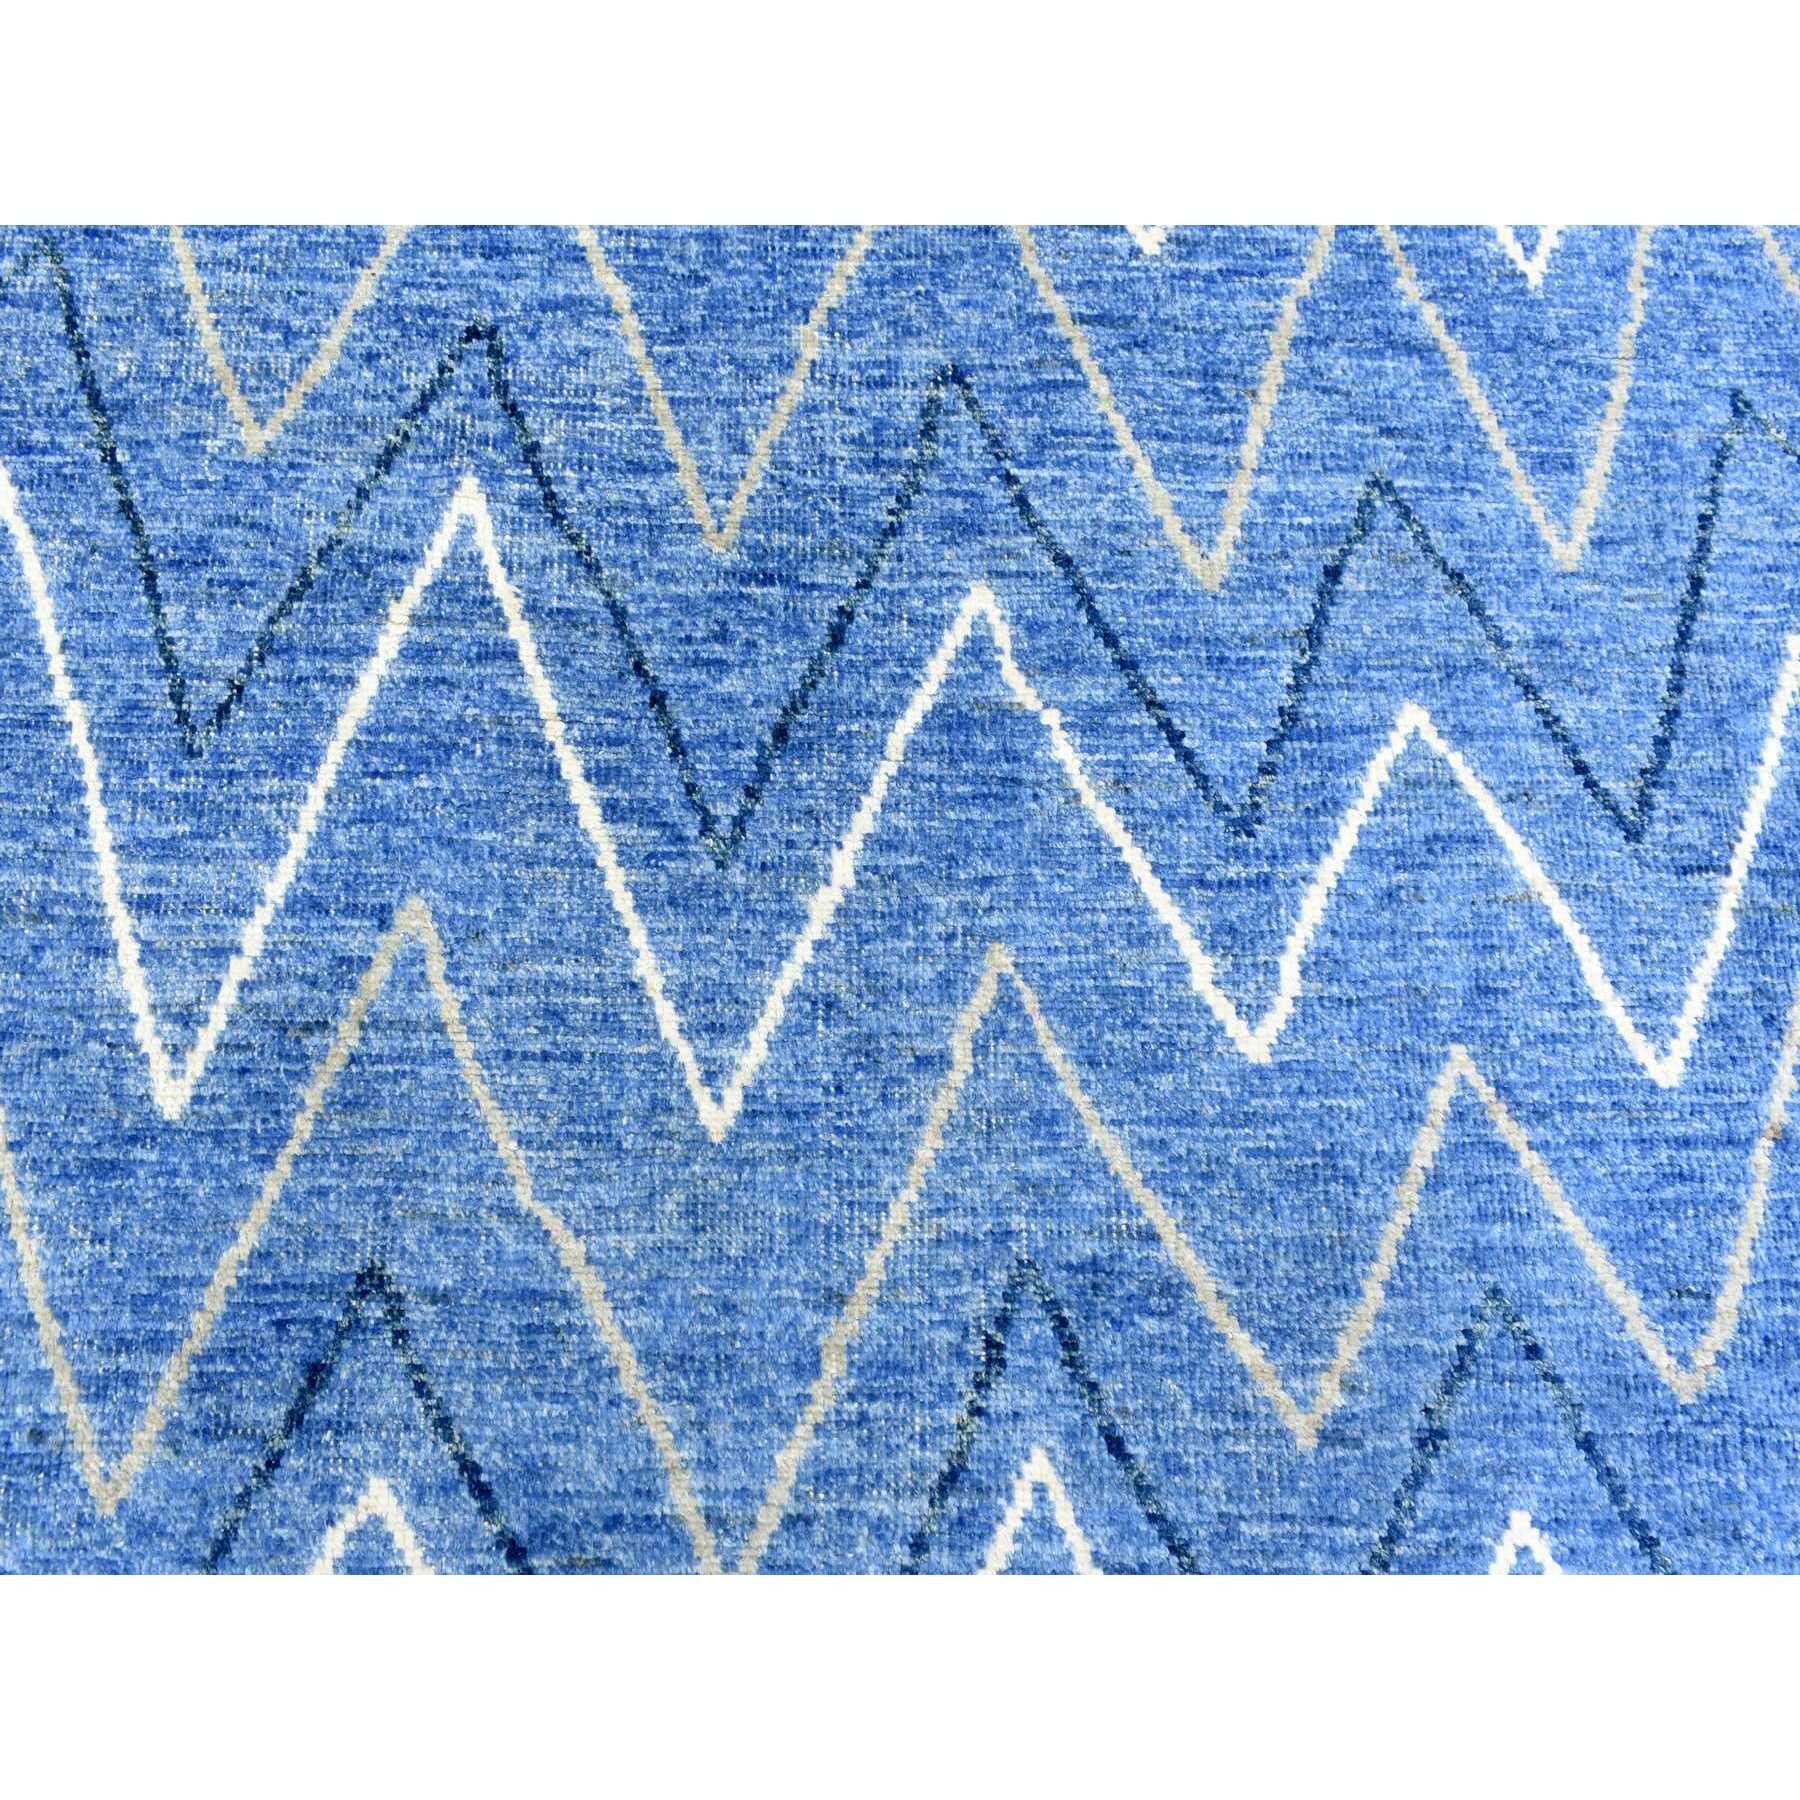 9'x11'5" Denim Blue, Boujaad Moroccan Berber Design with Zig Zag Chevron Design Natural Dyes, Pure Wool Hand Woven, Oriental Rug 